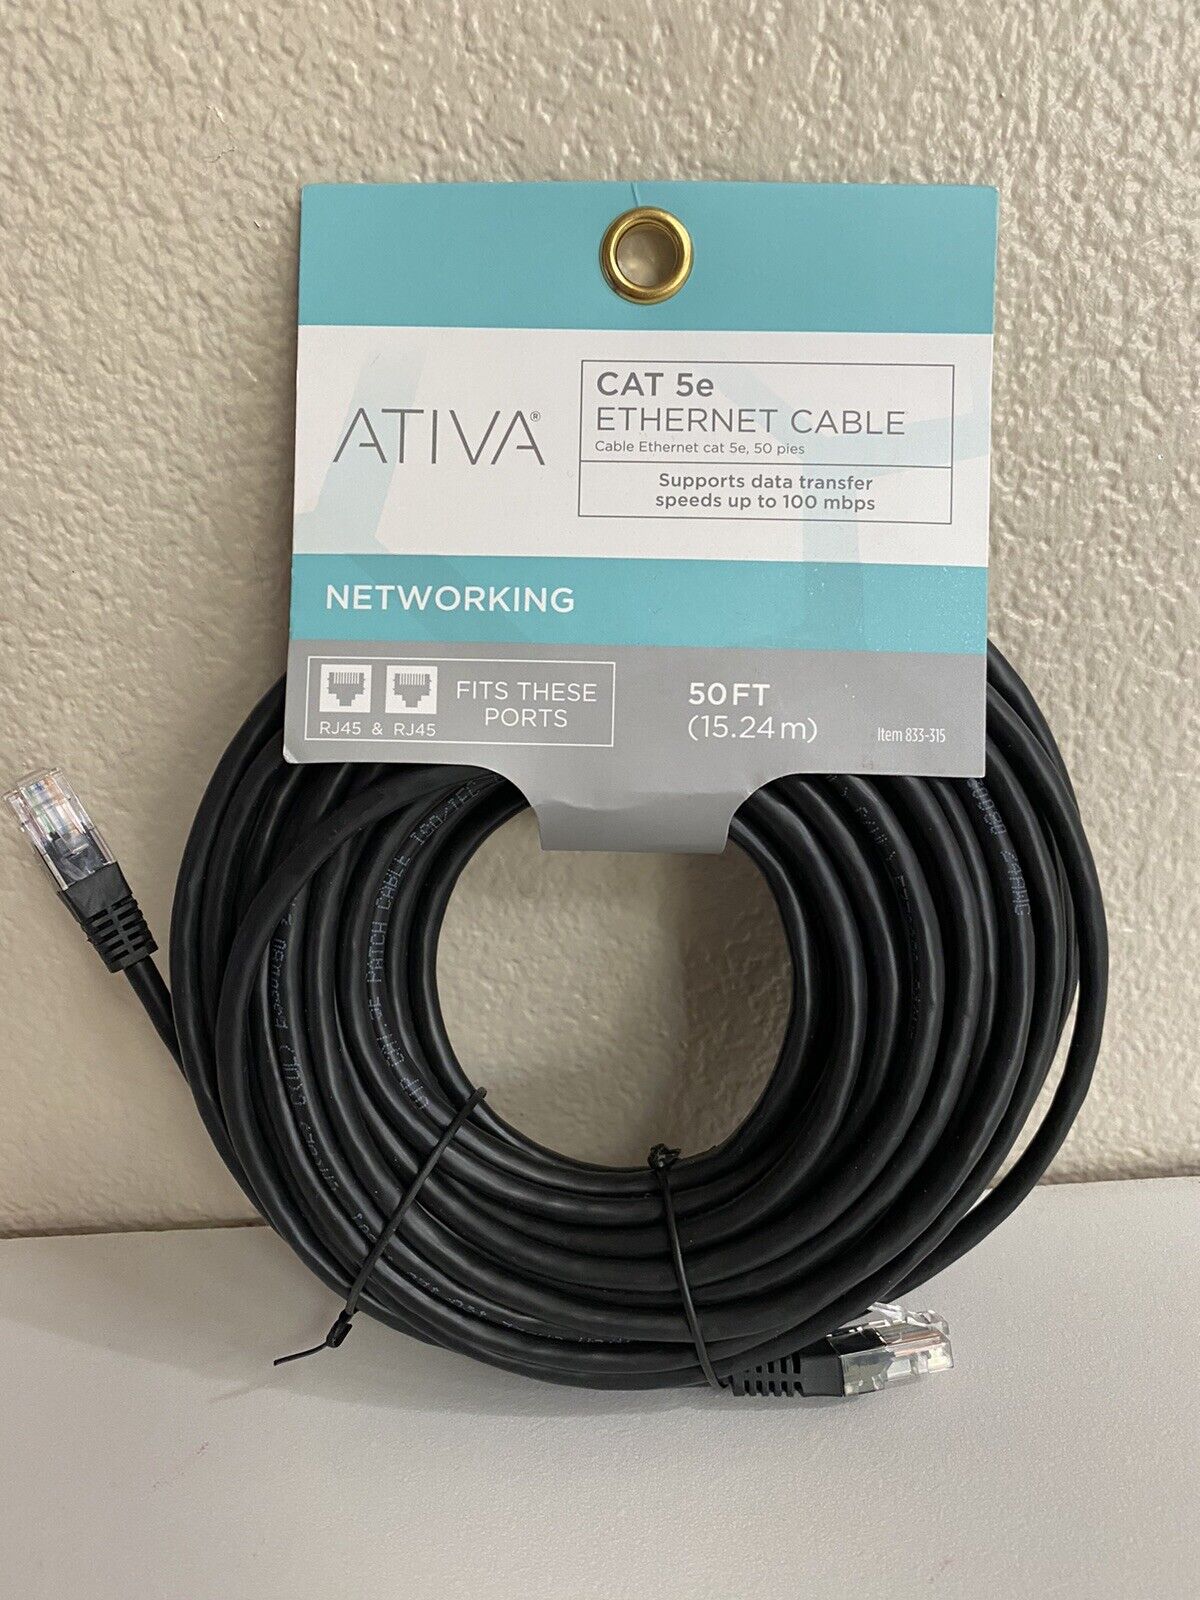 Ativa Cat 5e RJ45 High Speed Ethernet Cable ~ 50FT ~ Model 833-315~ New